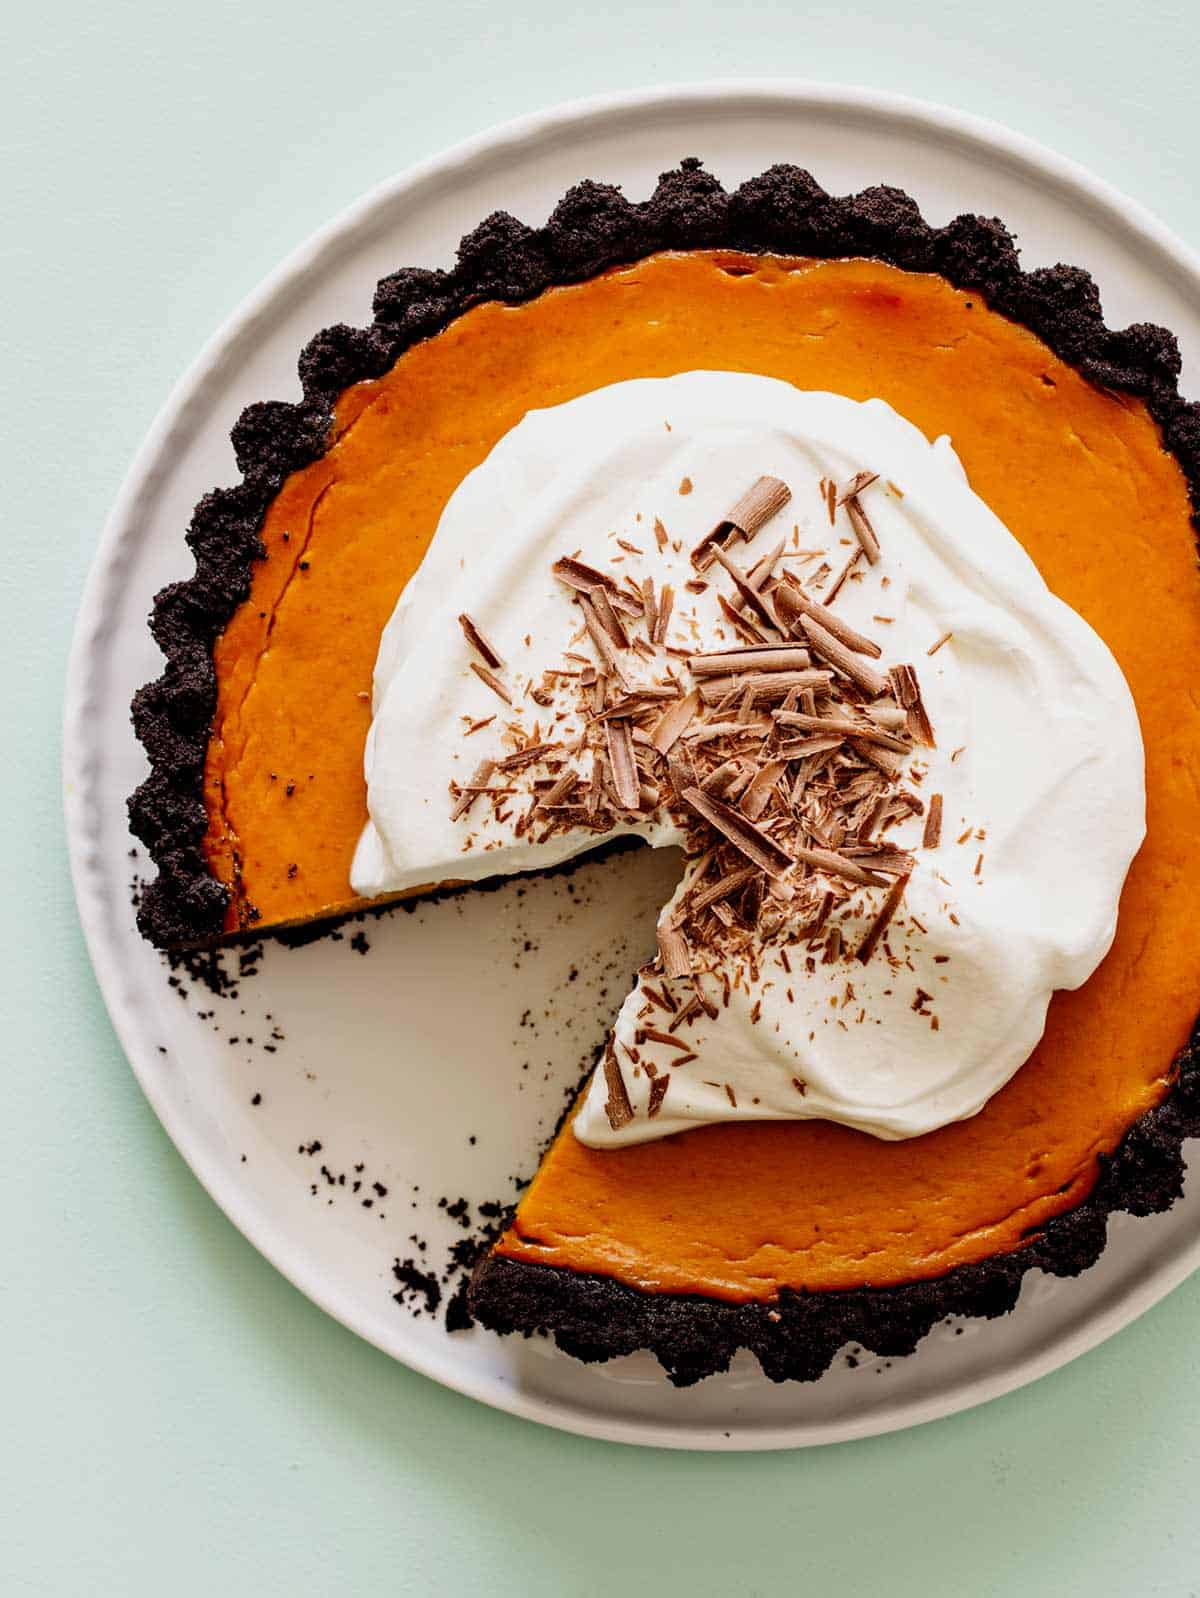 A whole pumpkin pie with chocolate crust and whipped cream with a slice taken out.